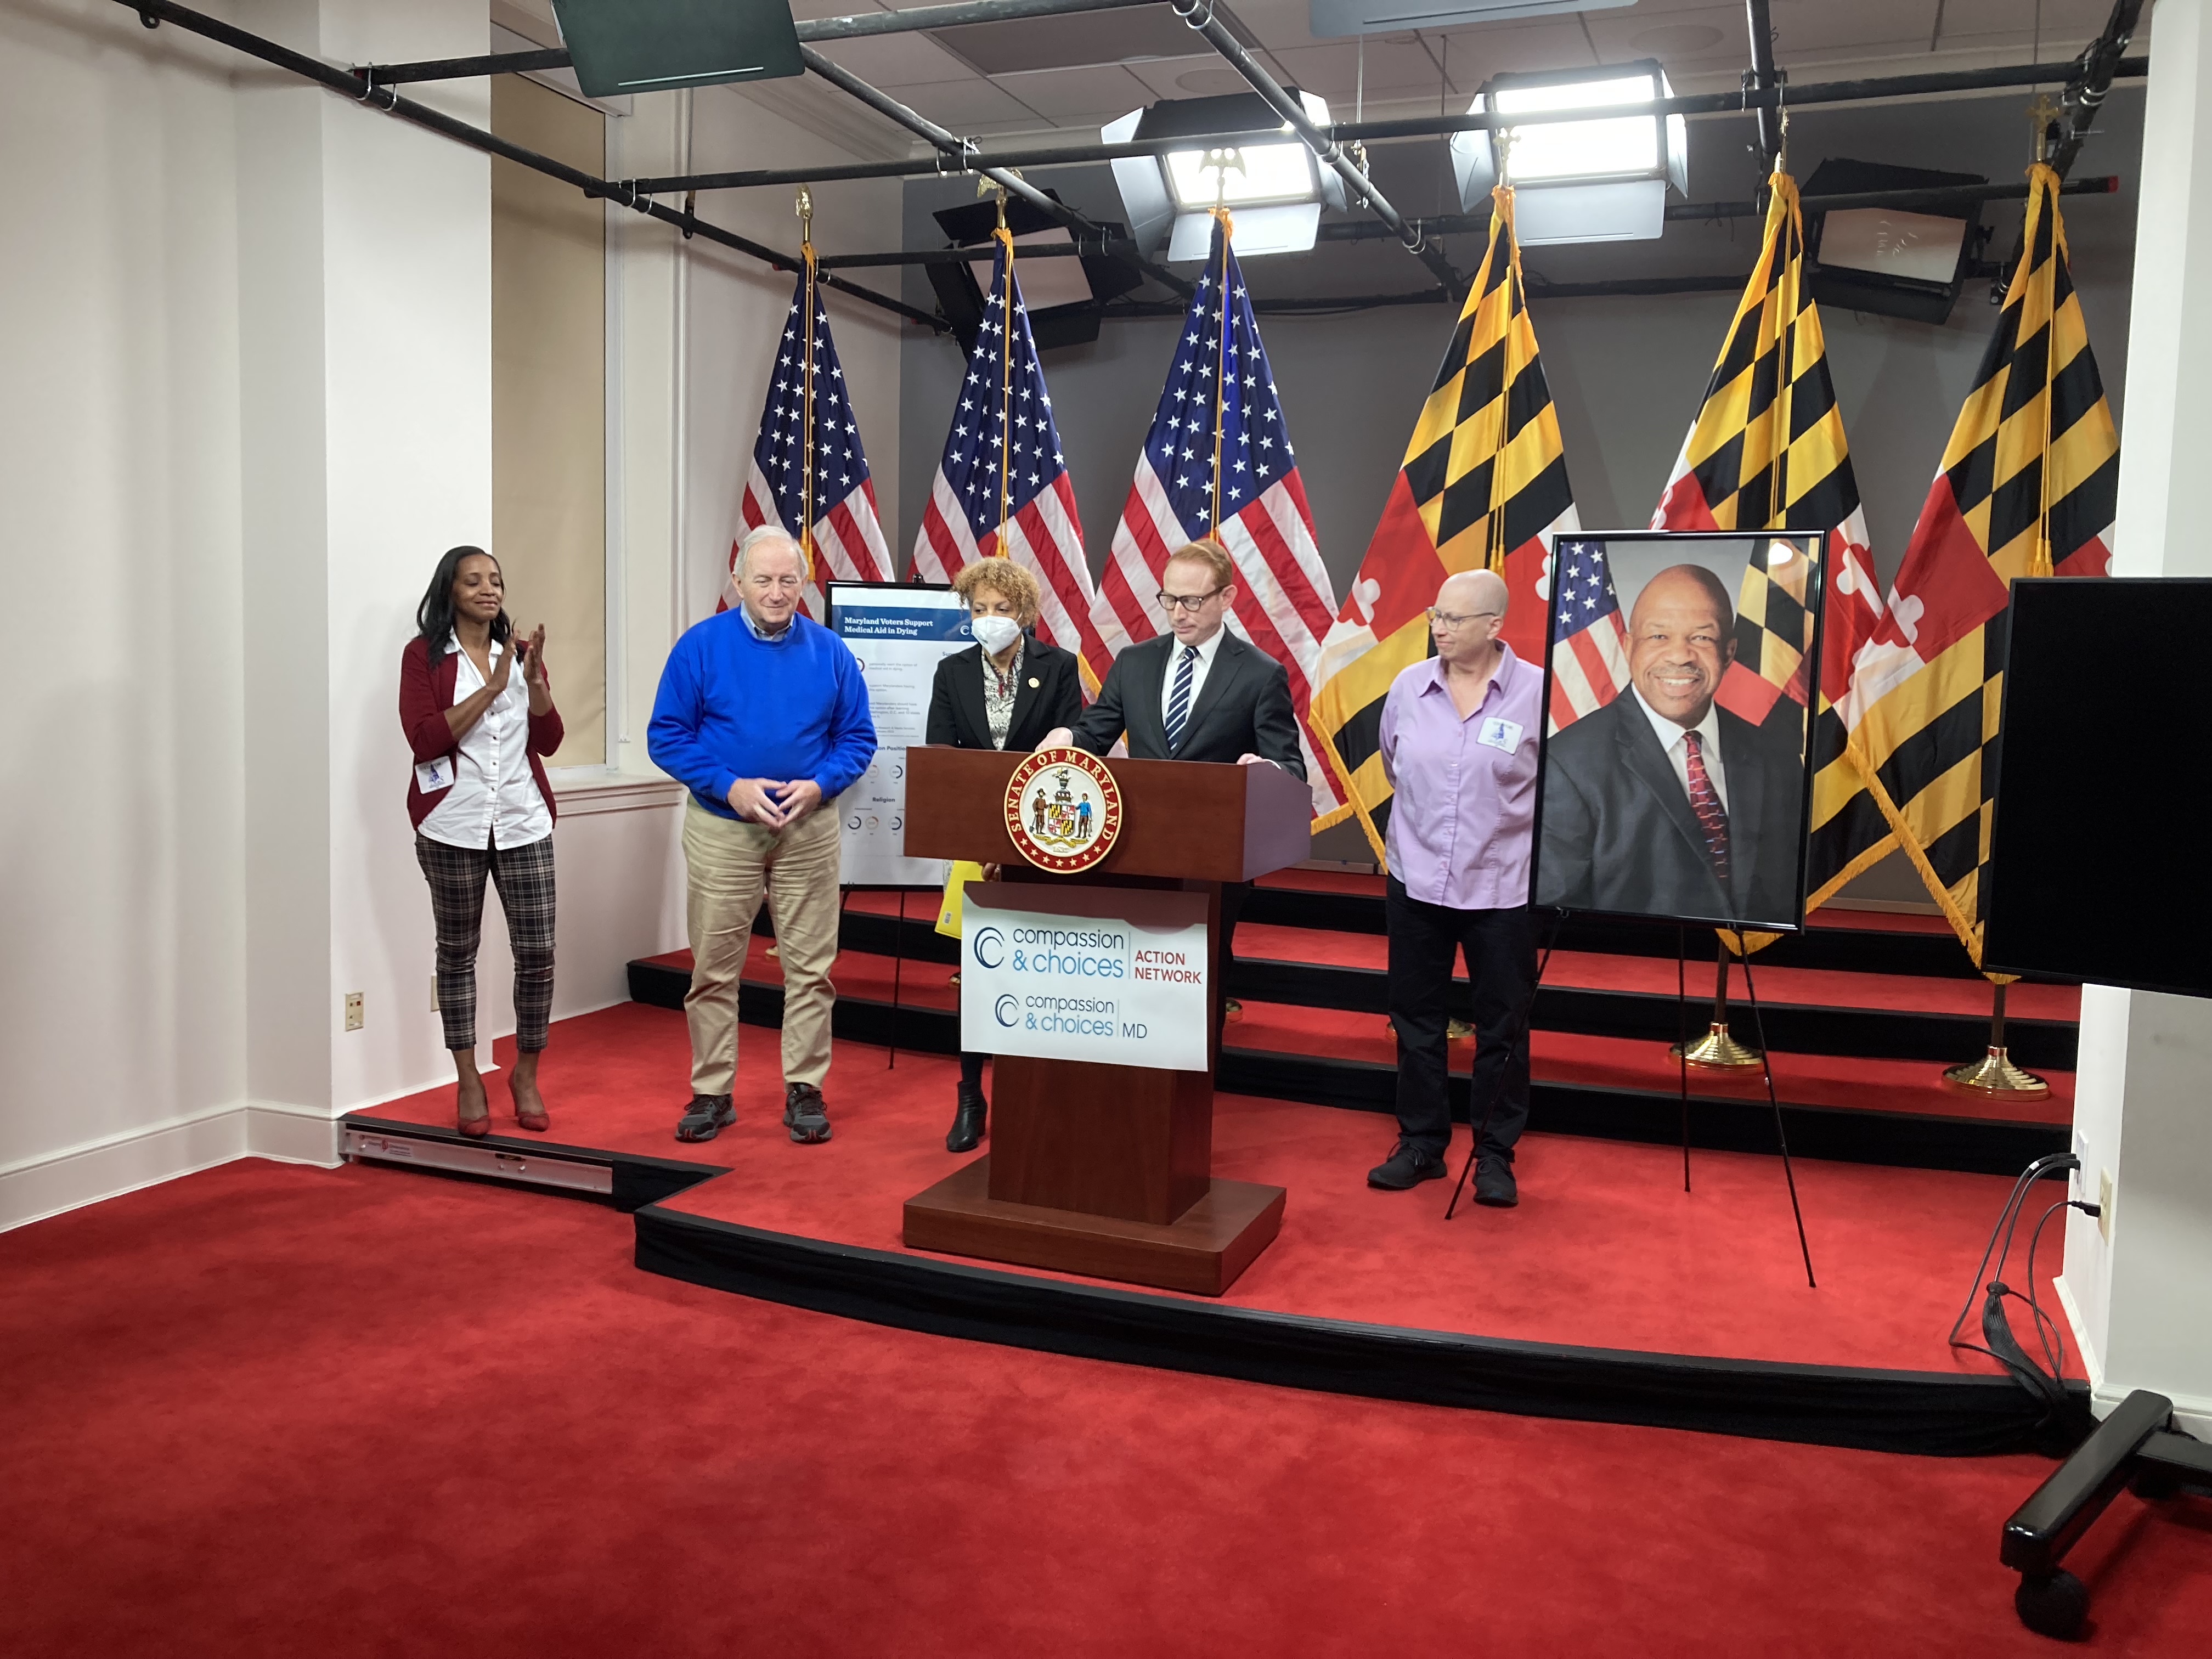 Brandi Alexander,  Terry Lierman, Del. Terri Hill, Sen. Jeff Waldstreicher, and Diane Kraus speaking at Annapolis news conference in support of Maryland End-of-Life Option Act.